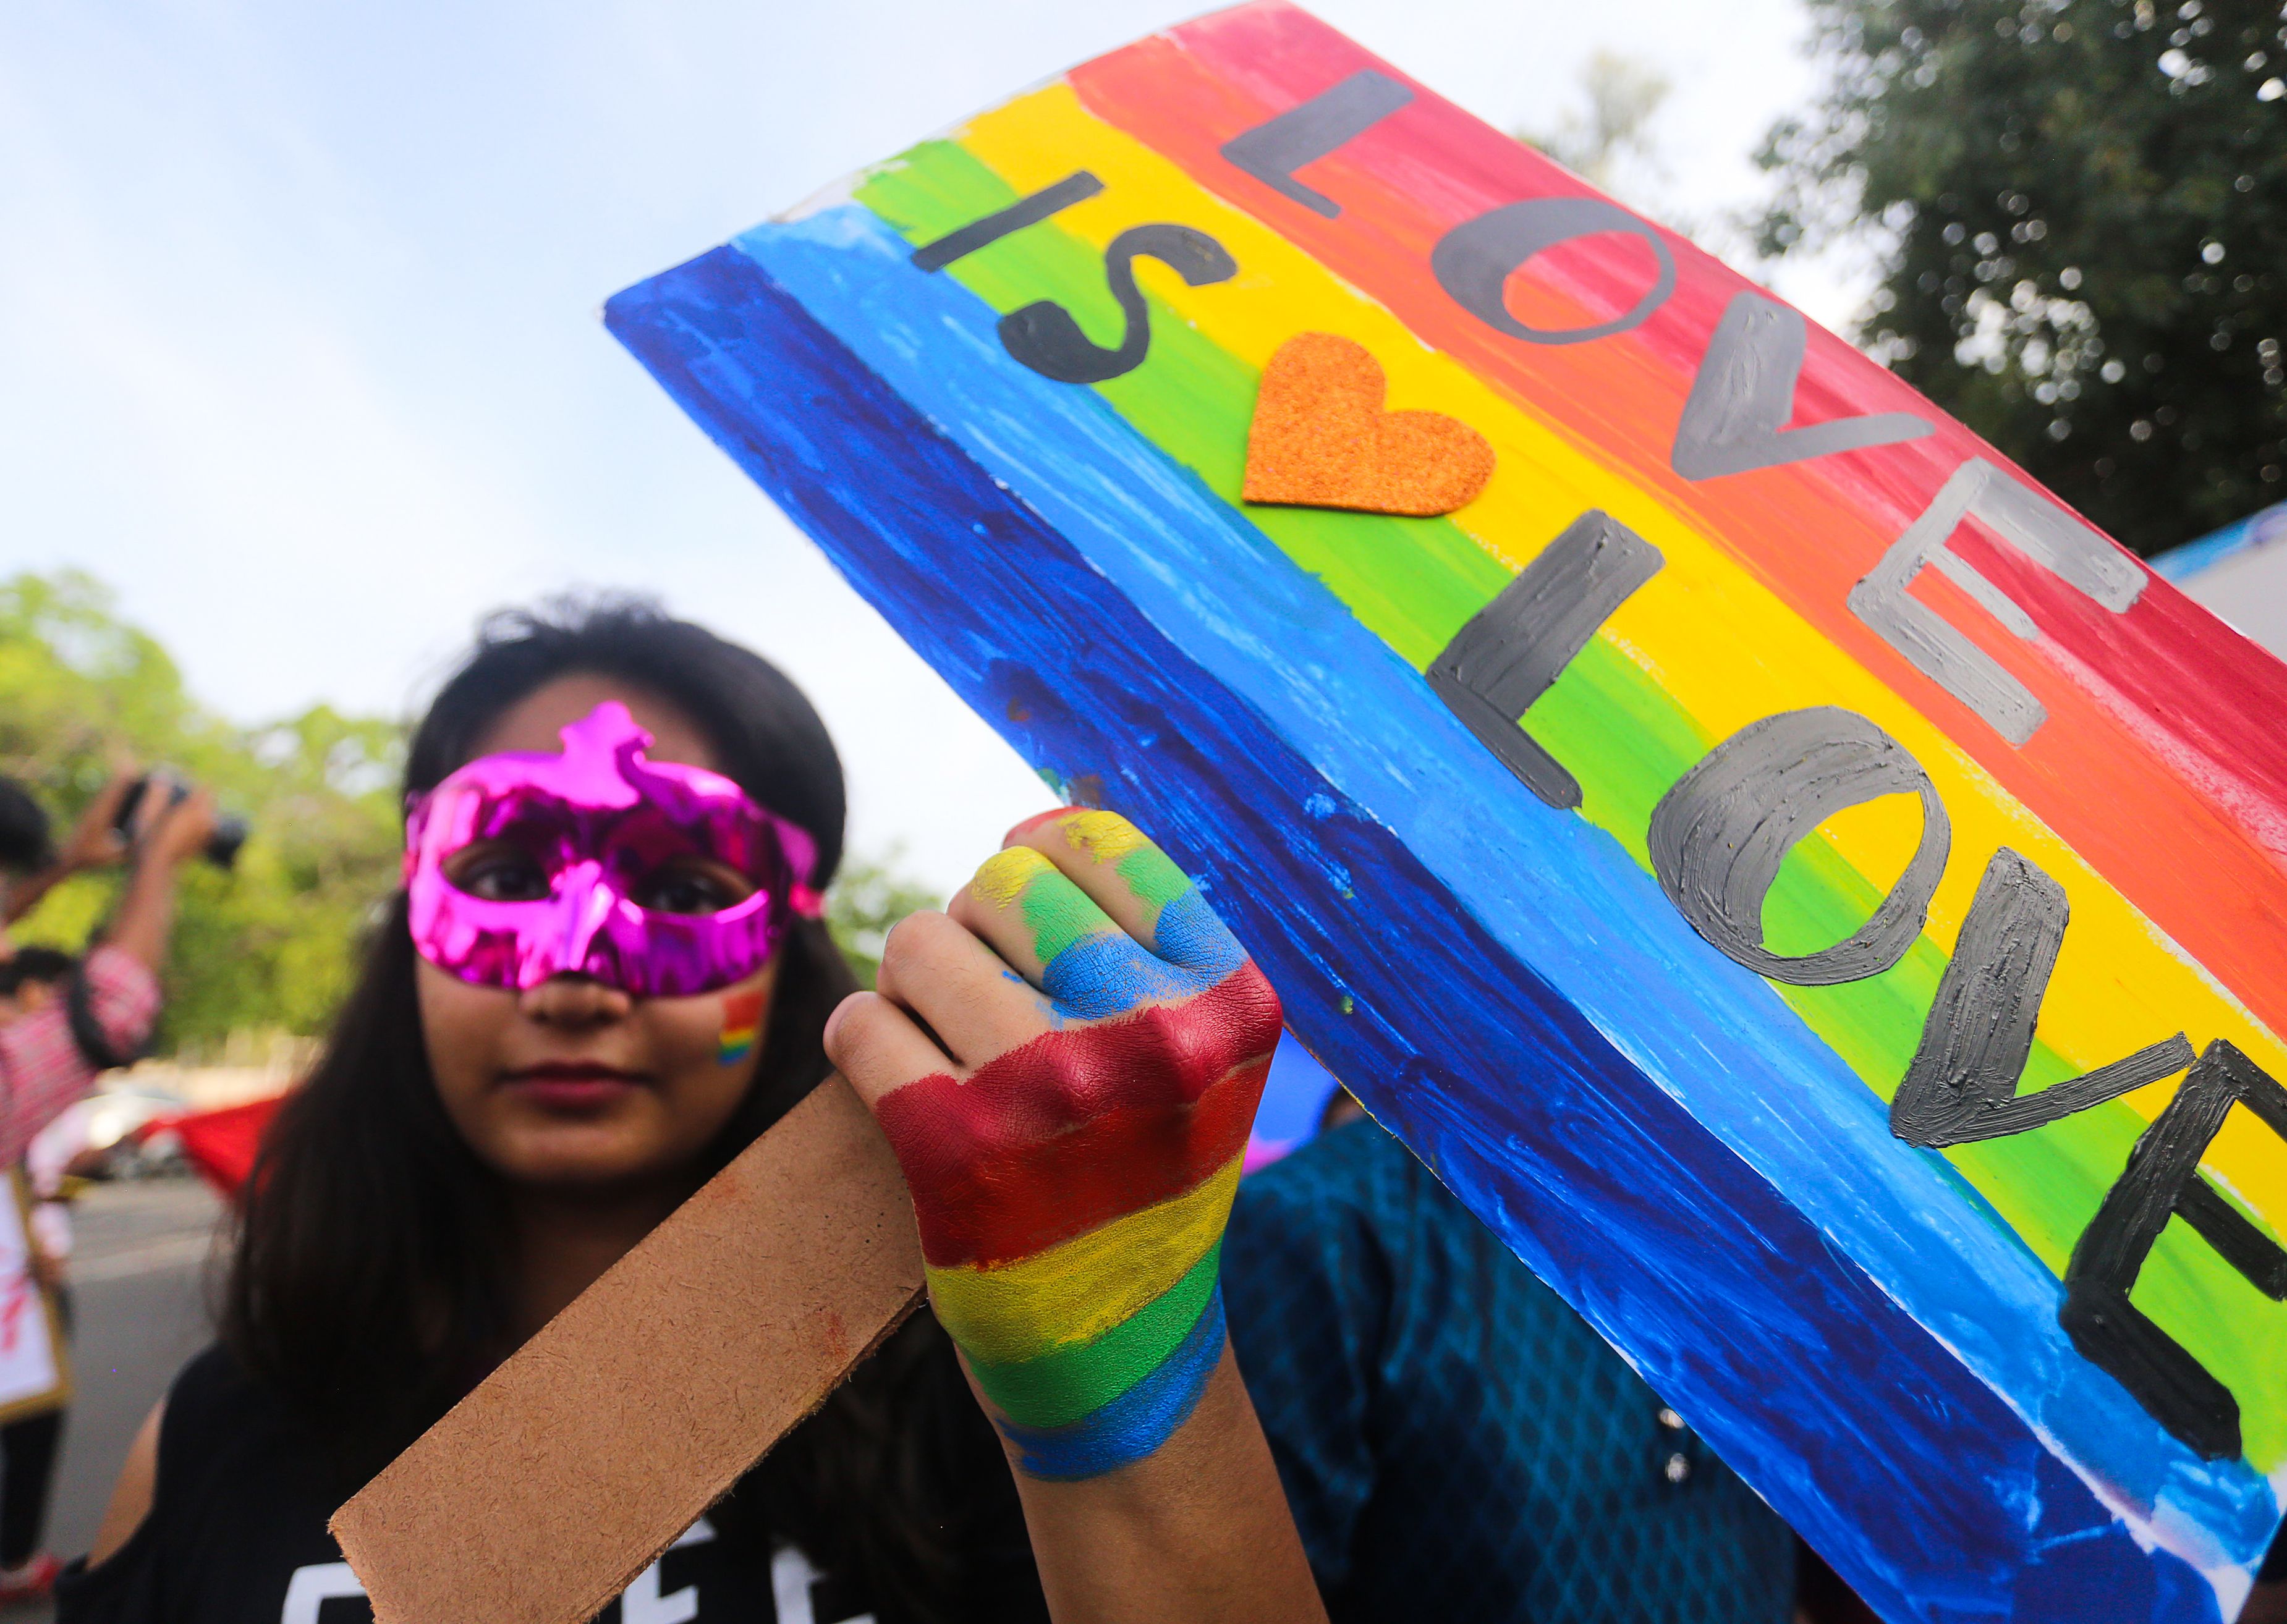 An Indian supporter of the LGBTQ community takes part in a pride parade in Bhopal on July 15, 2018. (AFP/Getty Images)